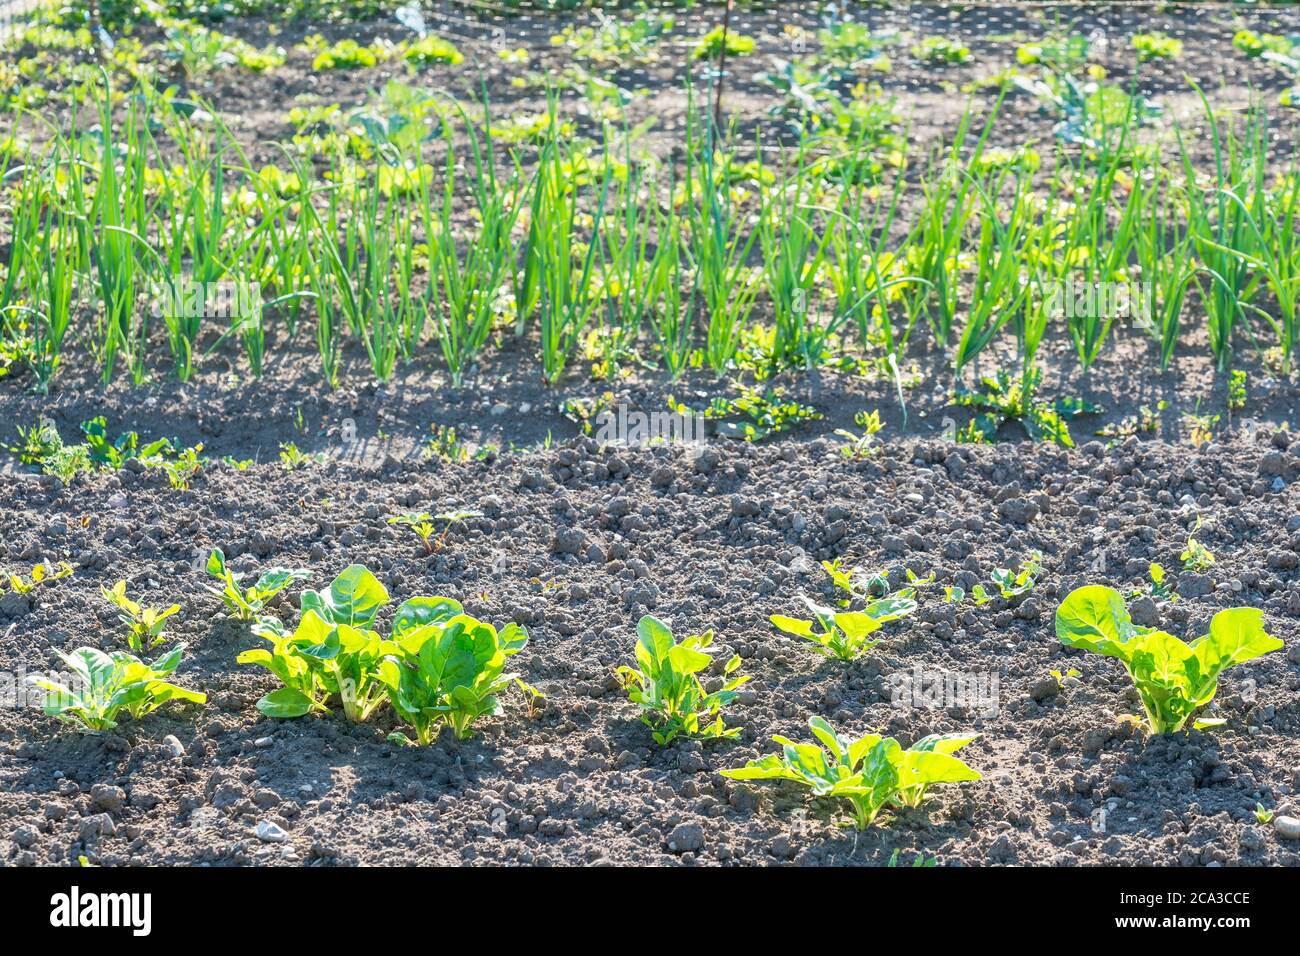 Young spinach in a sunny vegetable garden with scallions in the background.  Vitamins healthy biological homegrown spring organic - stock image Stock Photo